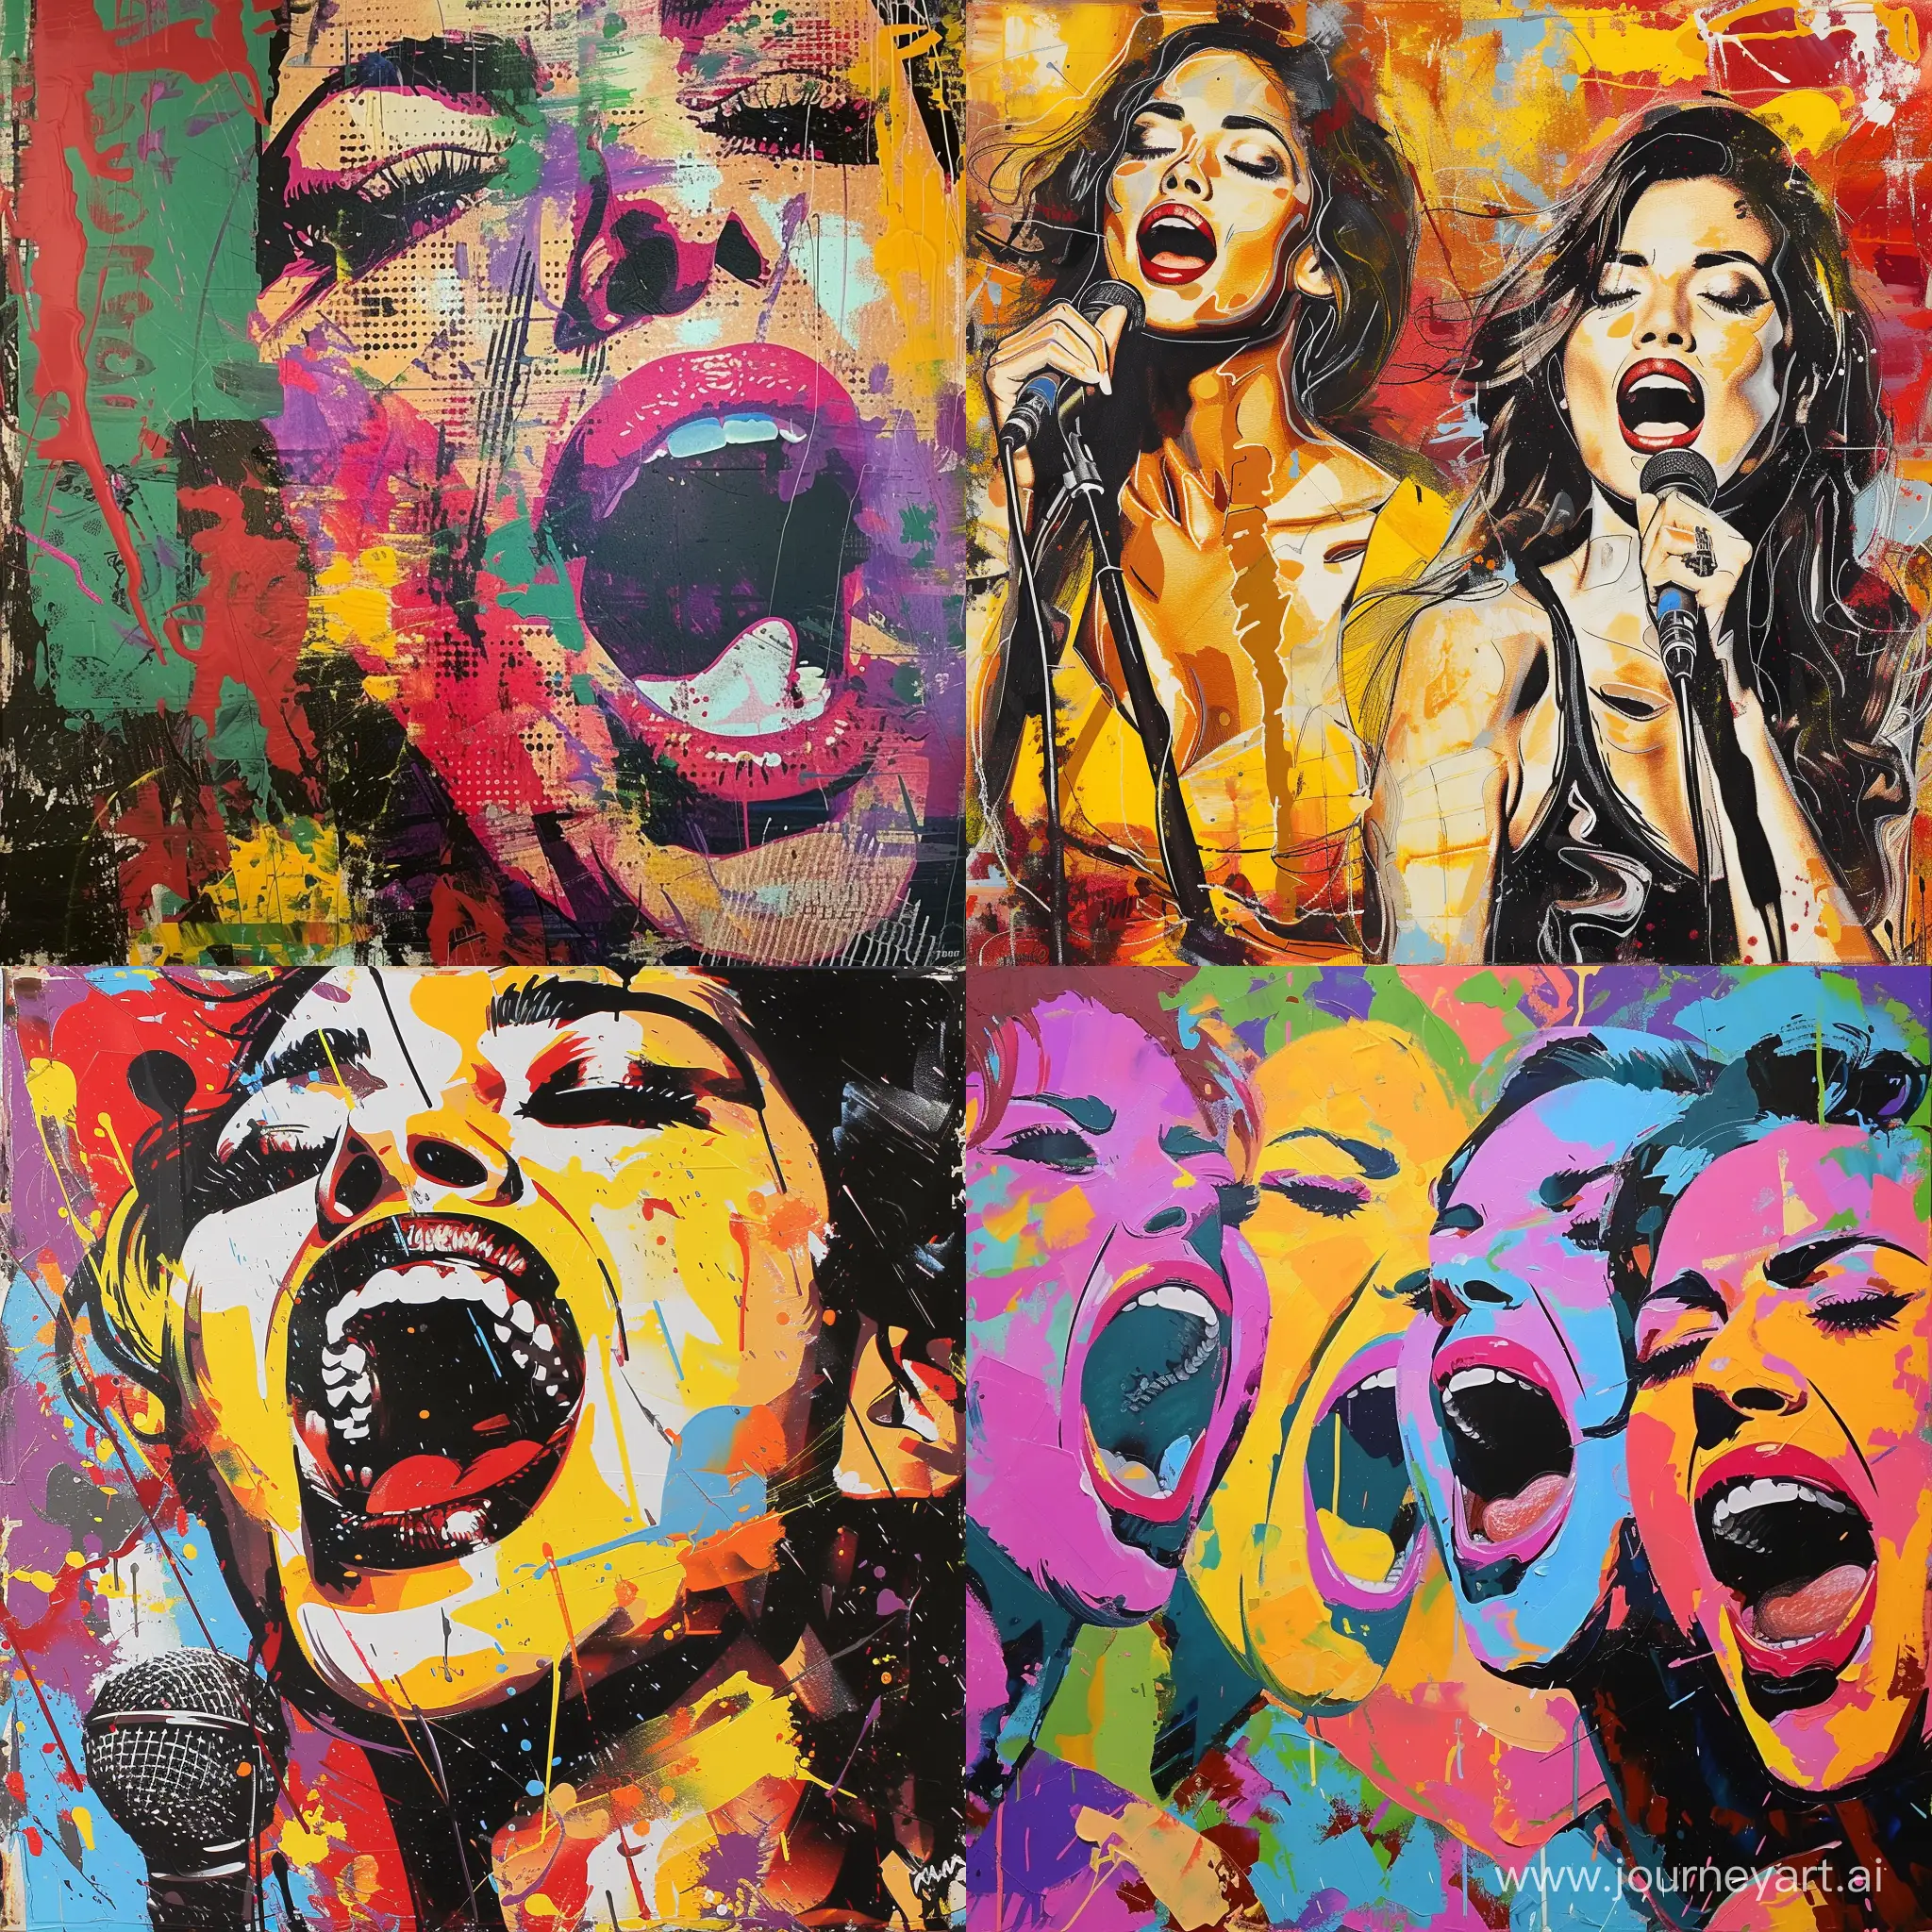 Pop-Art-Painting-Women-Expressing-Creativity-Through-Singing-and-Sounds